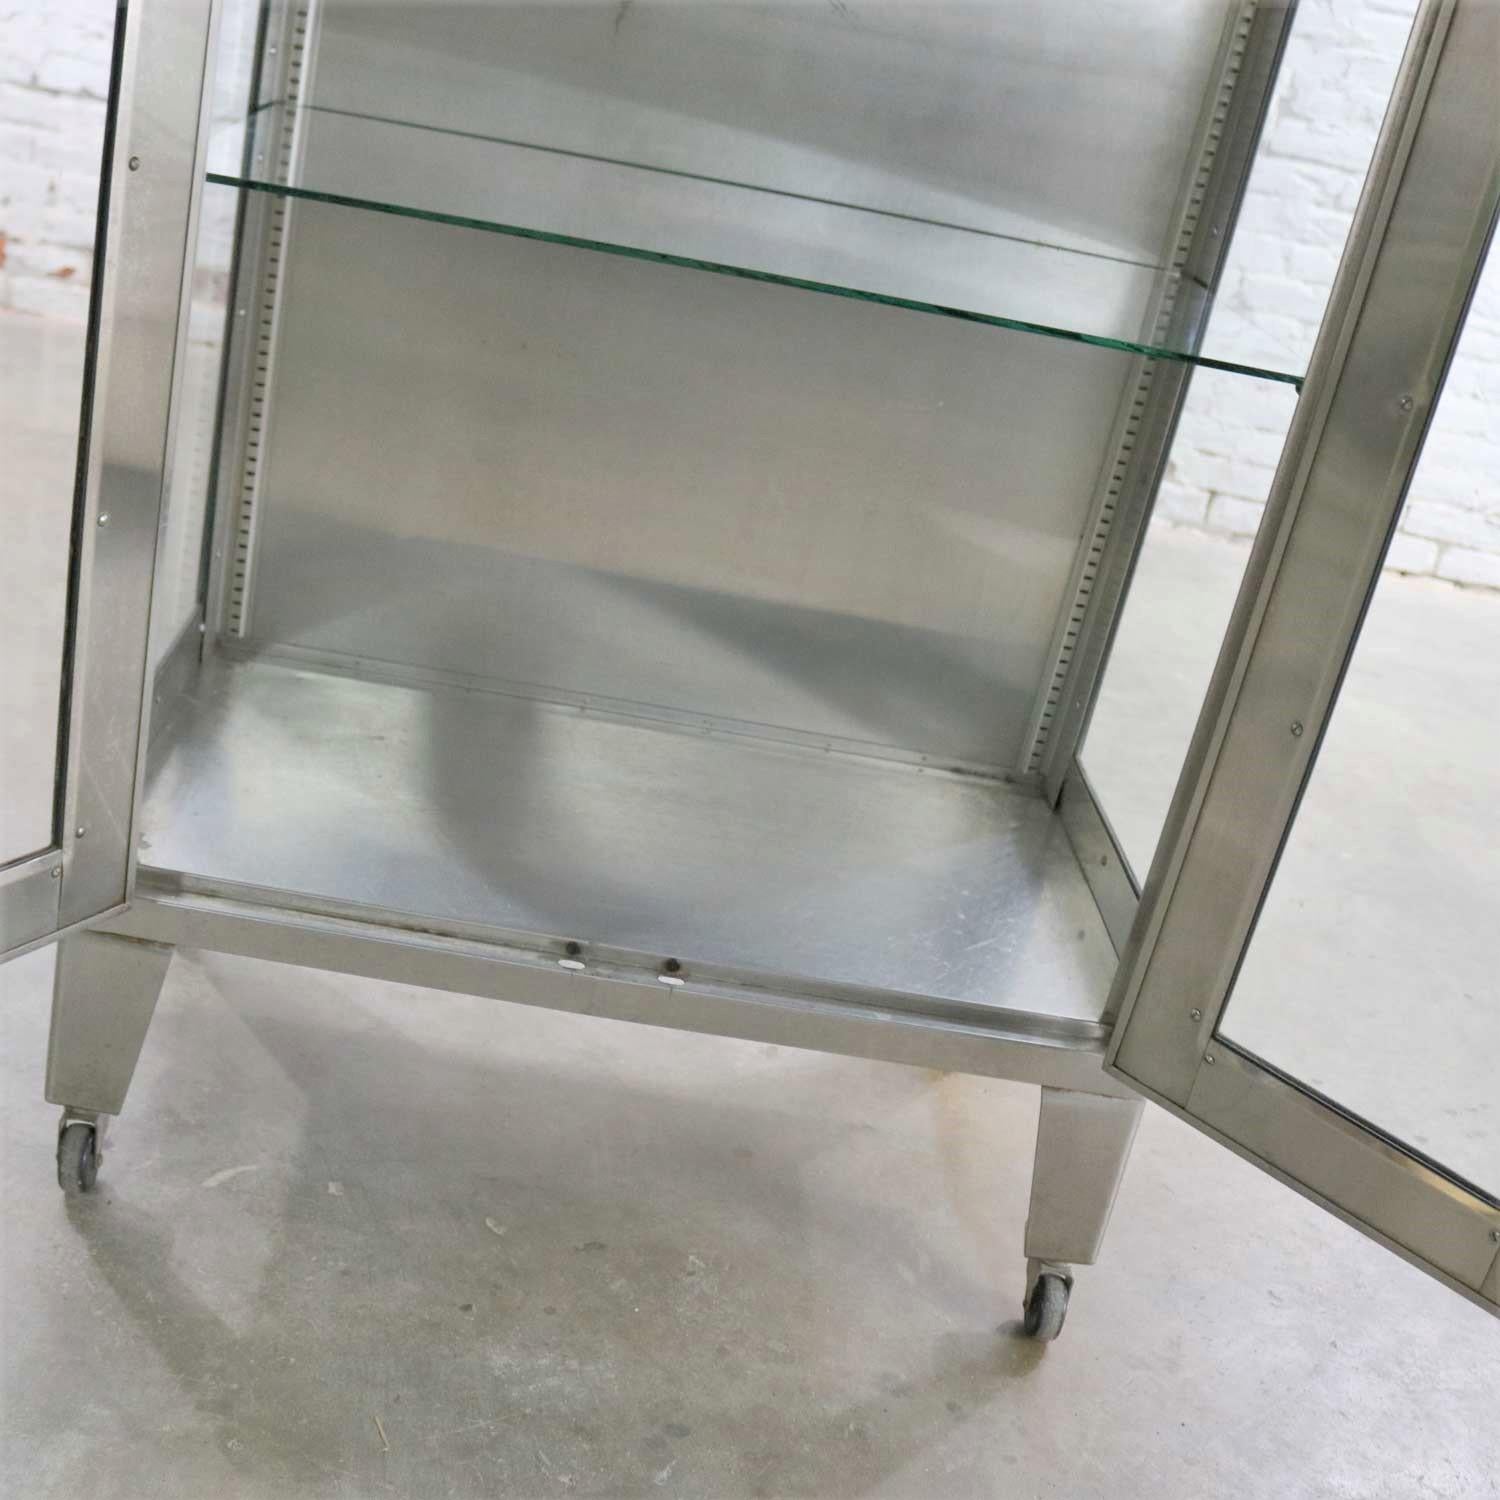 Stainless Steel Vintage Stainless-Steel Industrial Display Apothecary Medical Cabinet with Glass